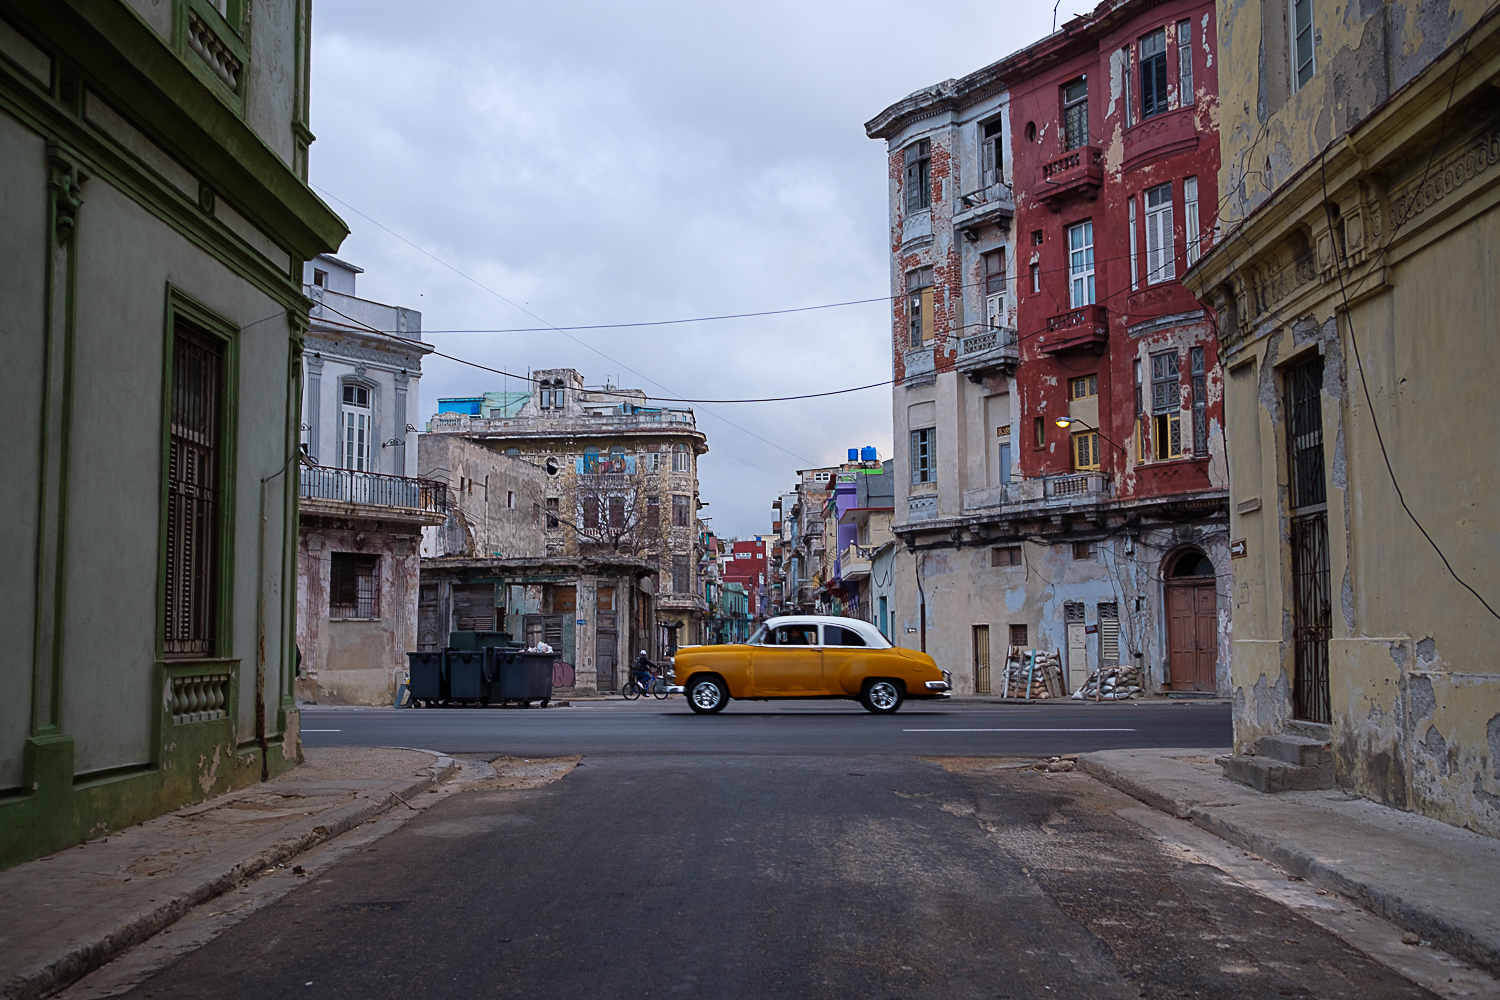 Habana 73.1 – a personal project with Fuji X cameras